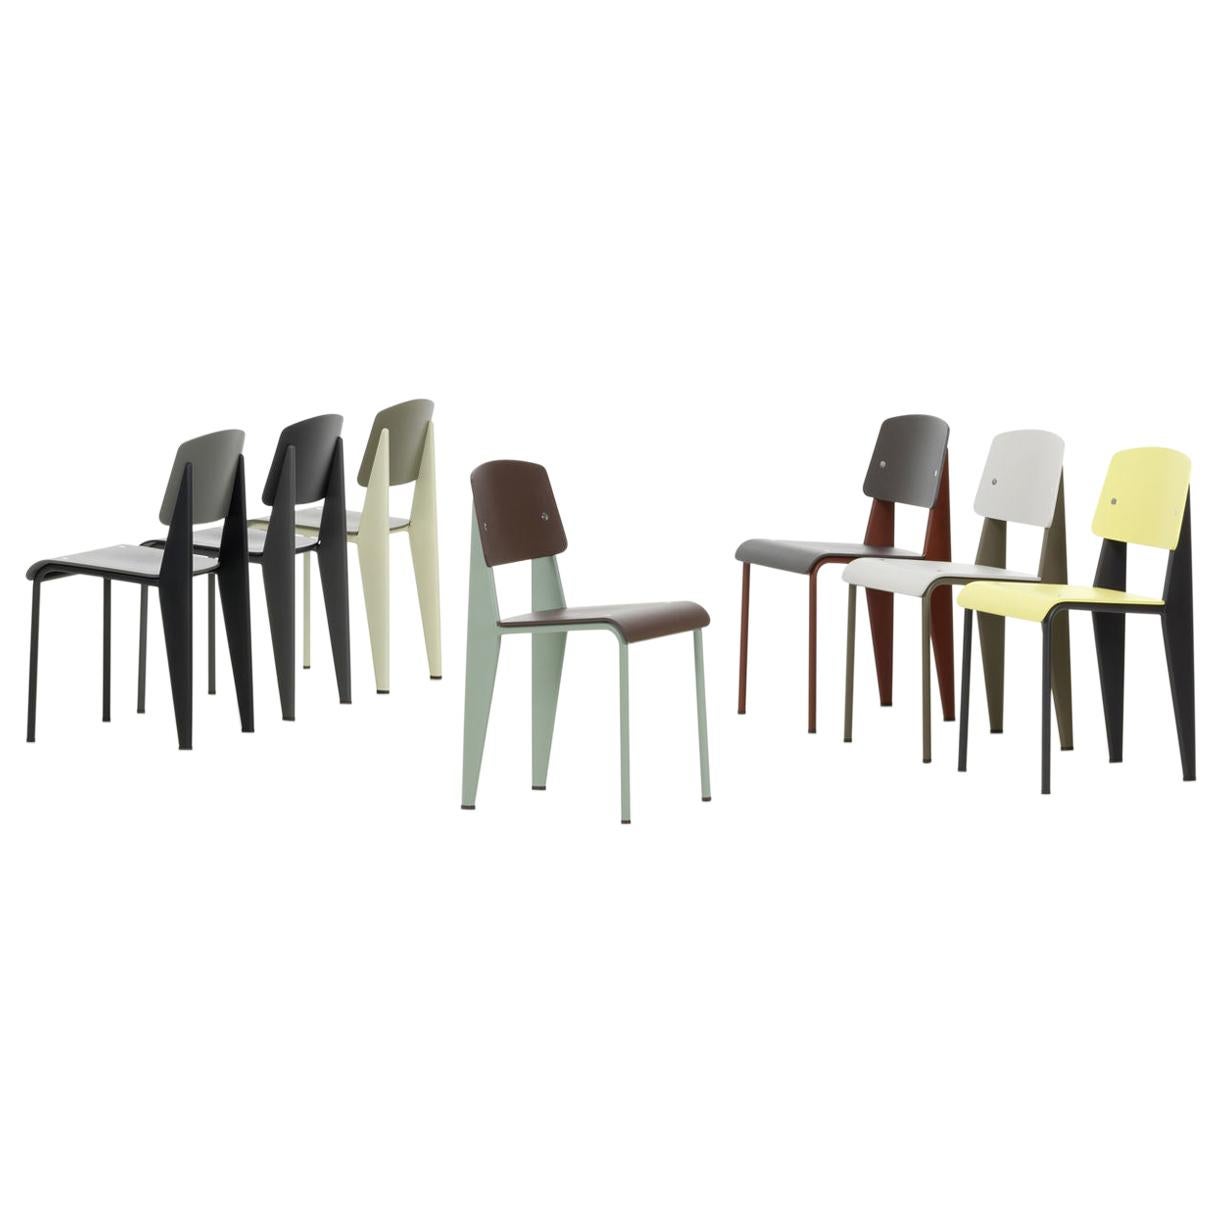 8 Mixed Vitra Standard SP Chairs For Sale